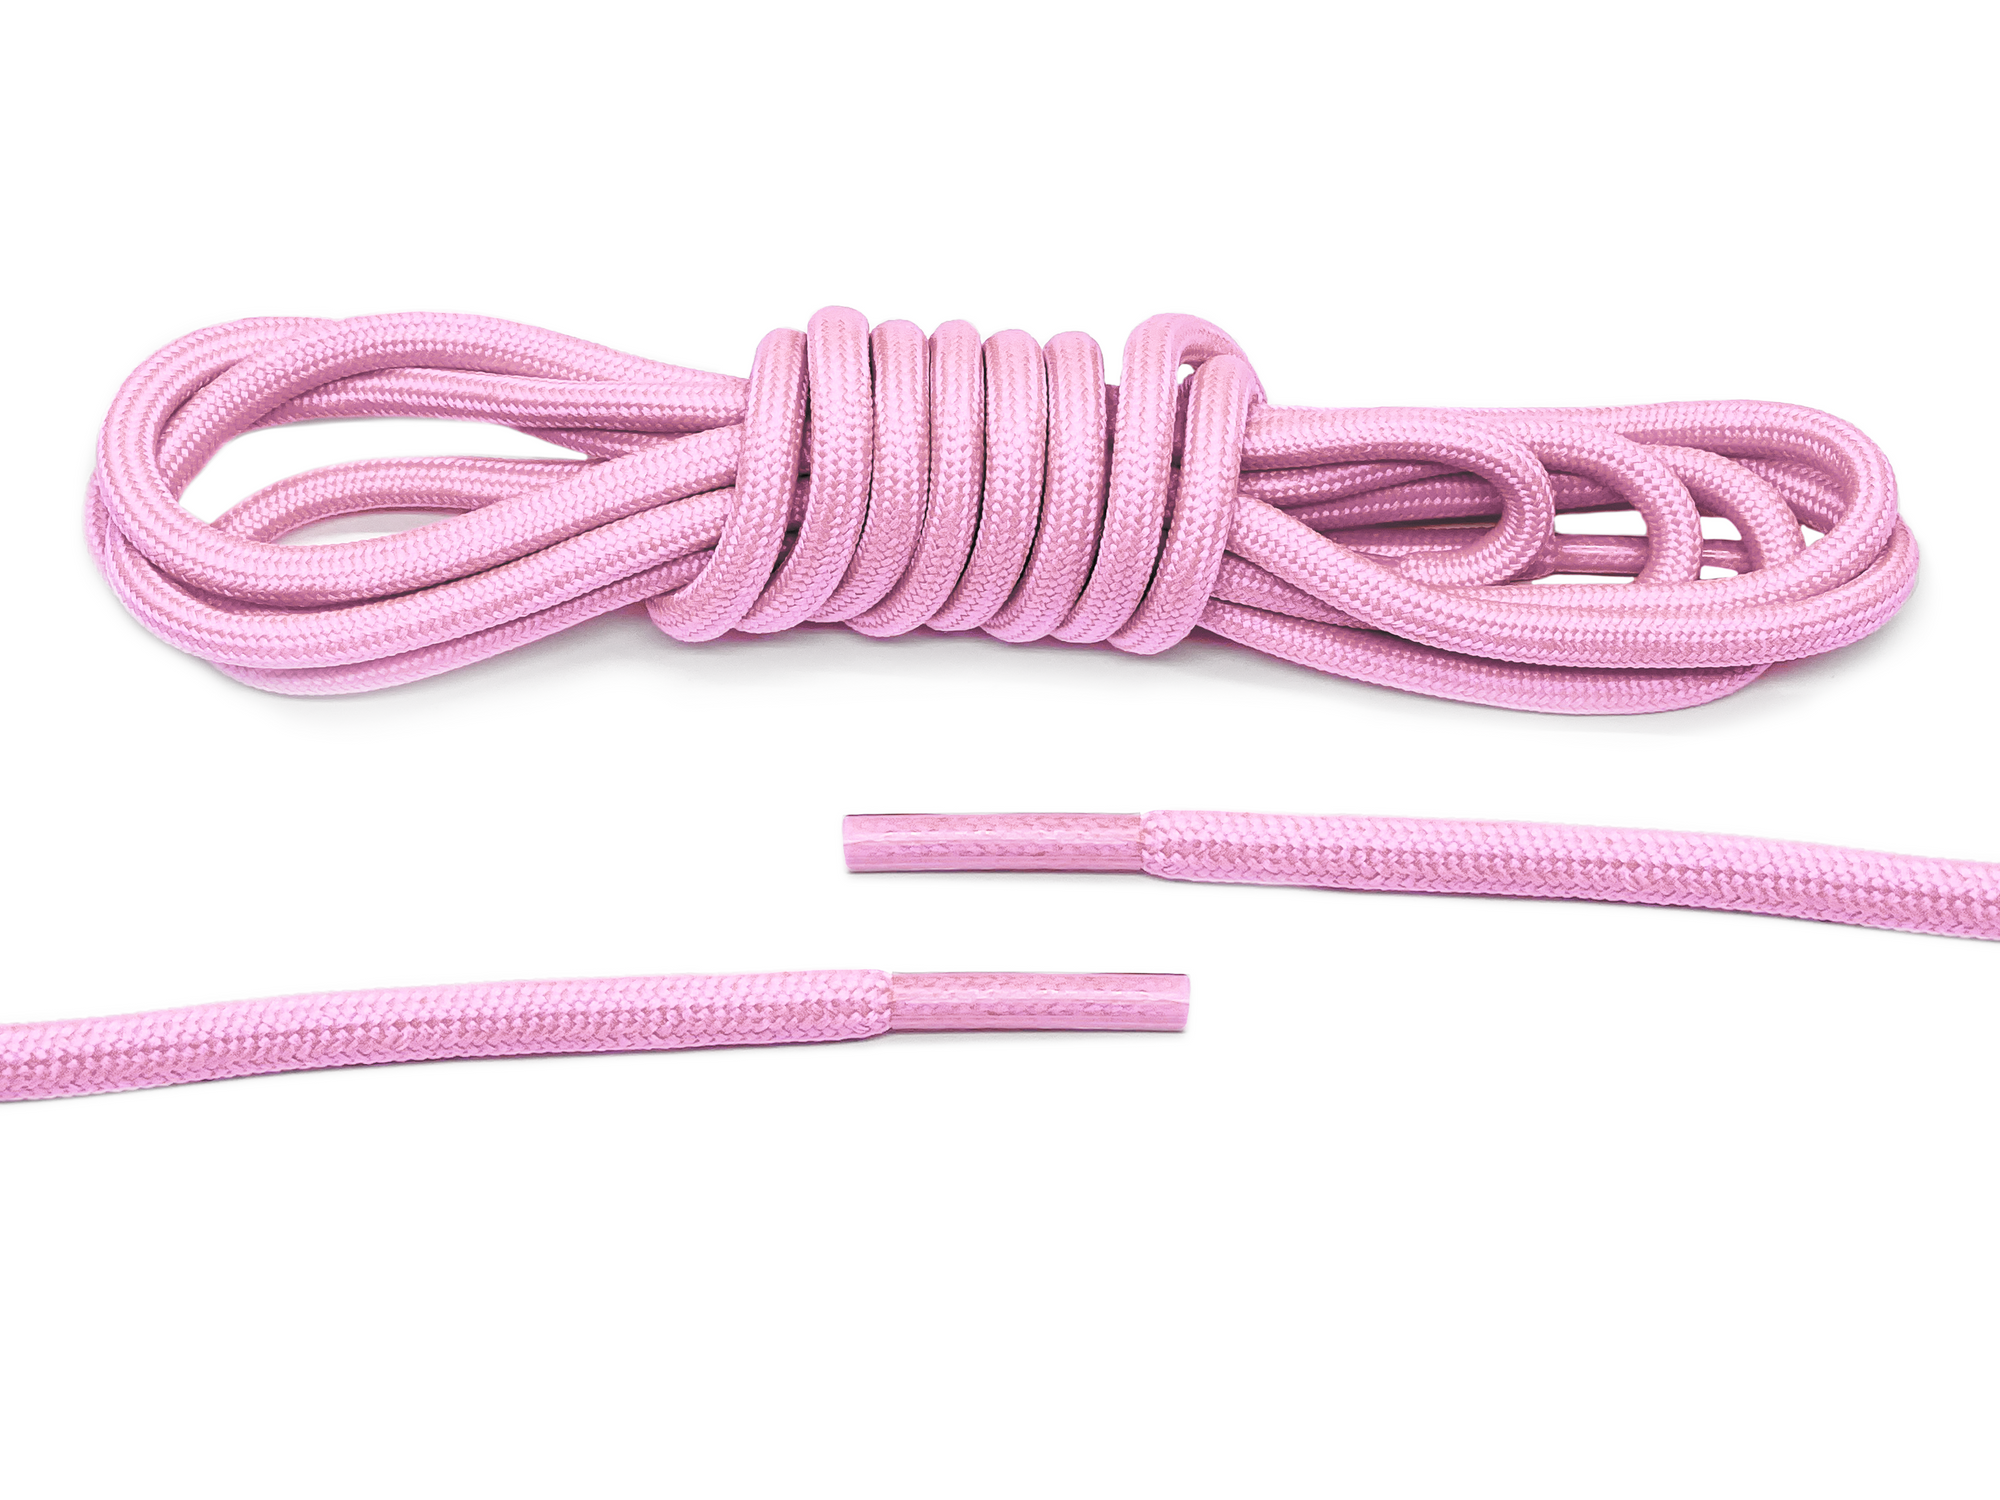 The Pink Round Shoe Lace - Belaced